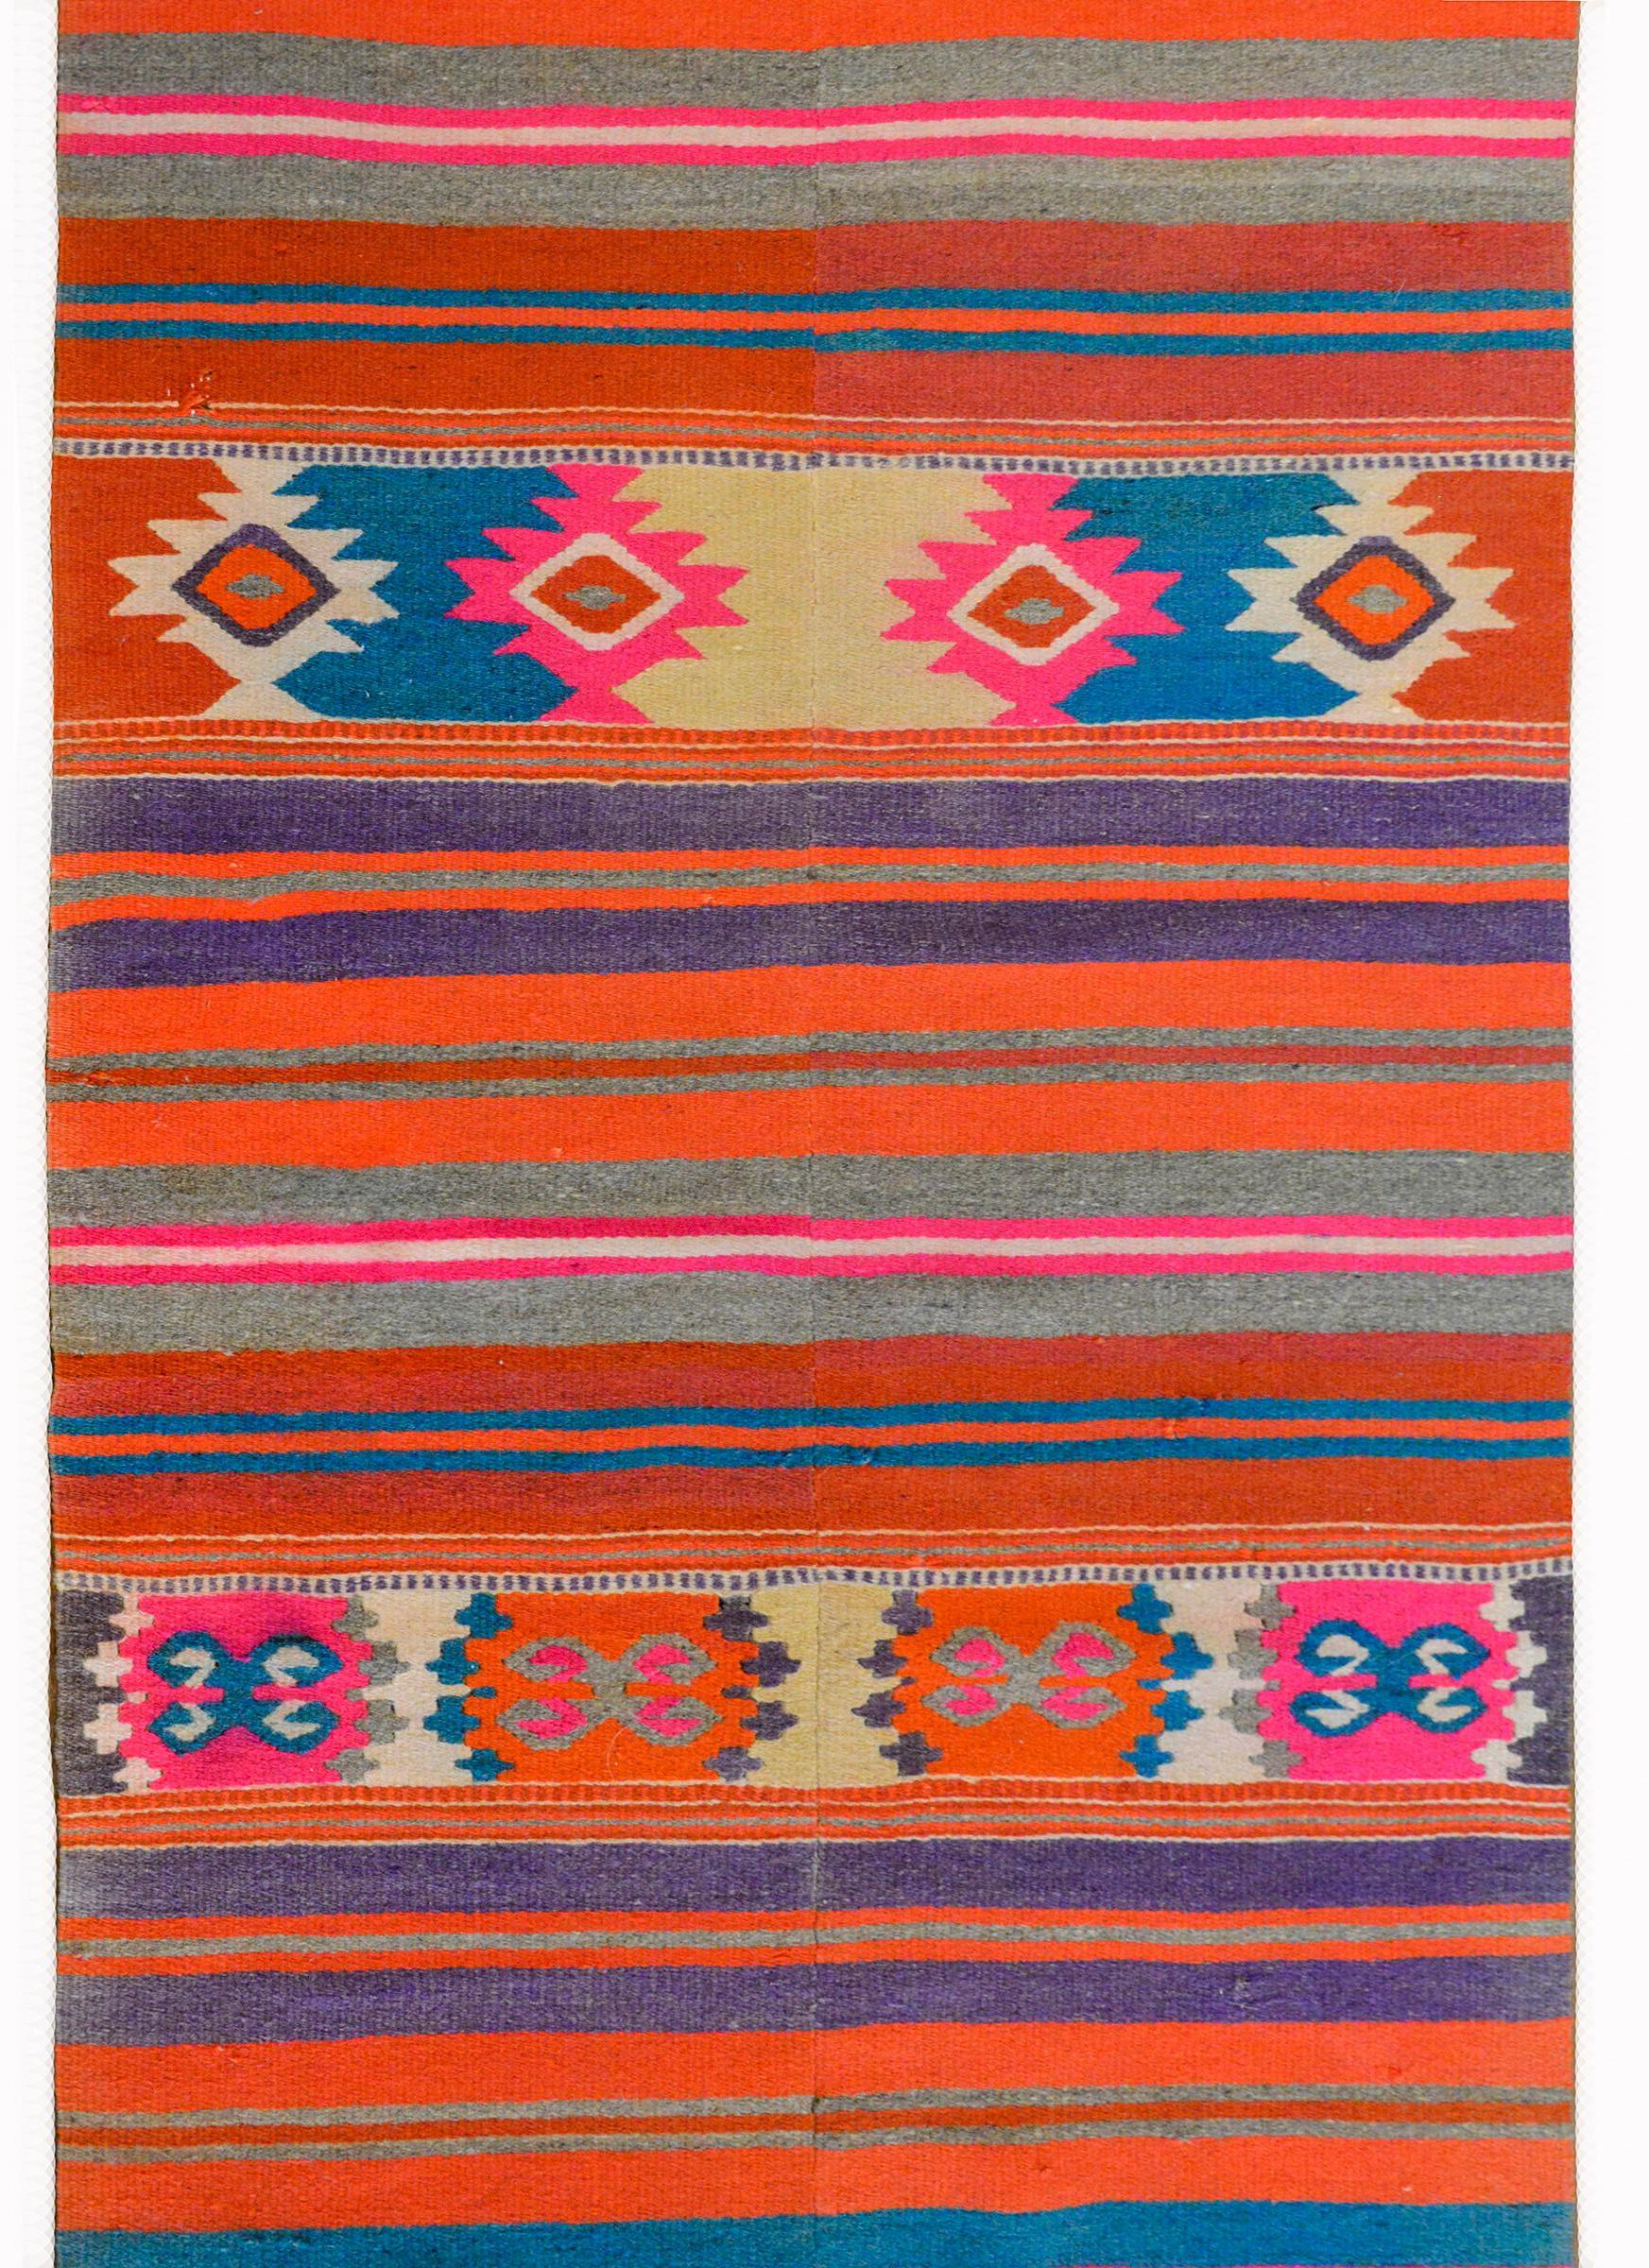 A gorgeous and bold Late 20th century Mexican handwoven kilim rug with rich orange, indigo, crimson, pink, white, and natural wool stripes, and three geometric patterned stripes.